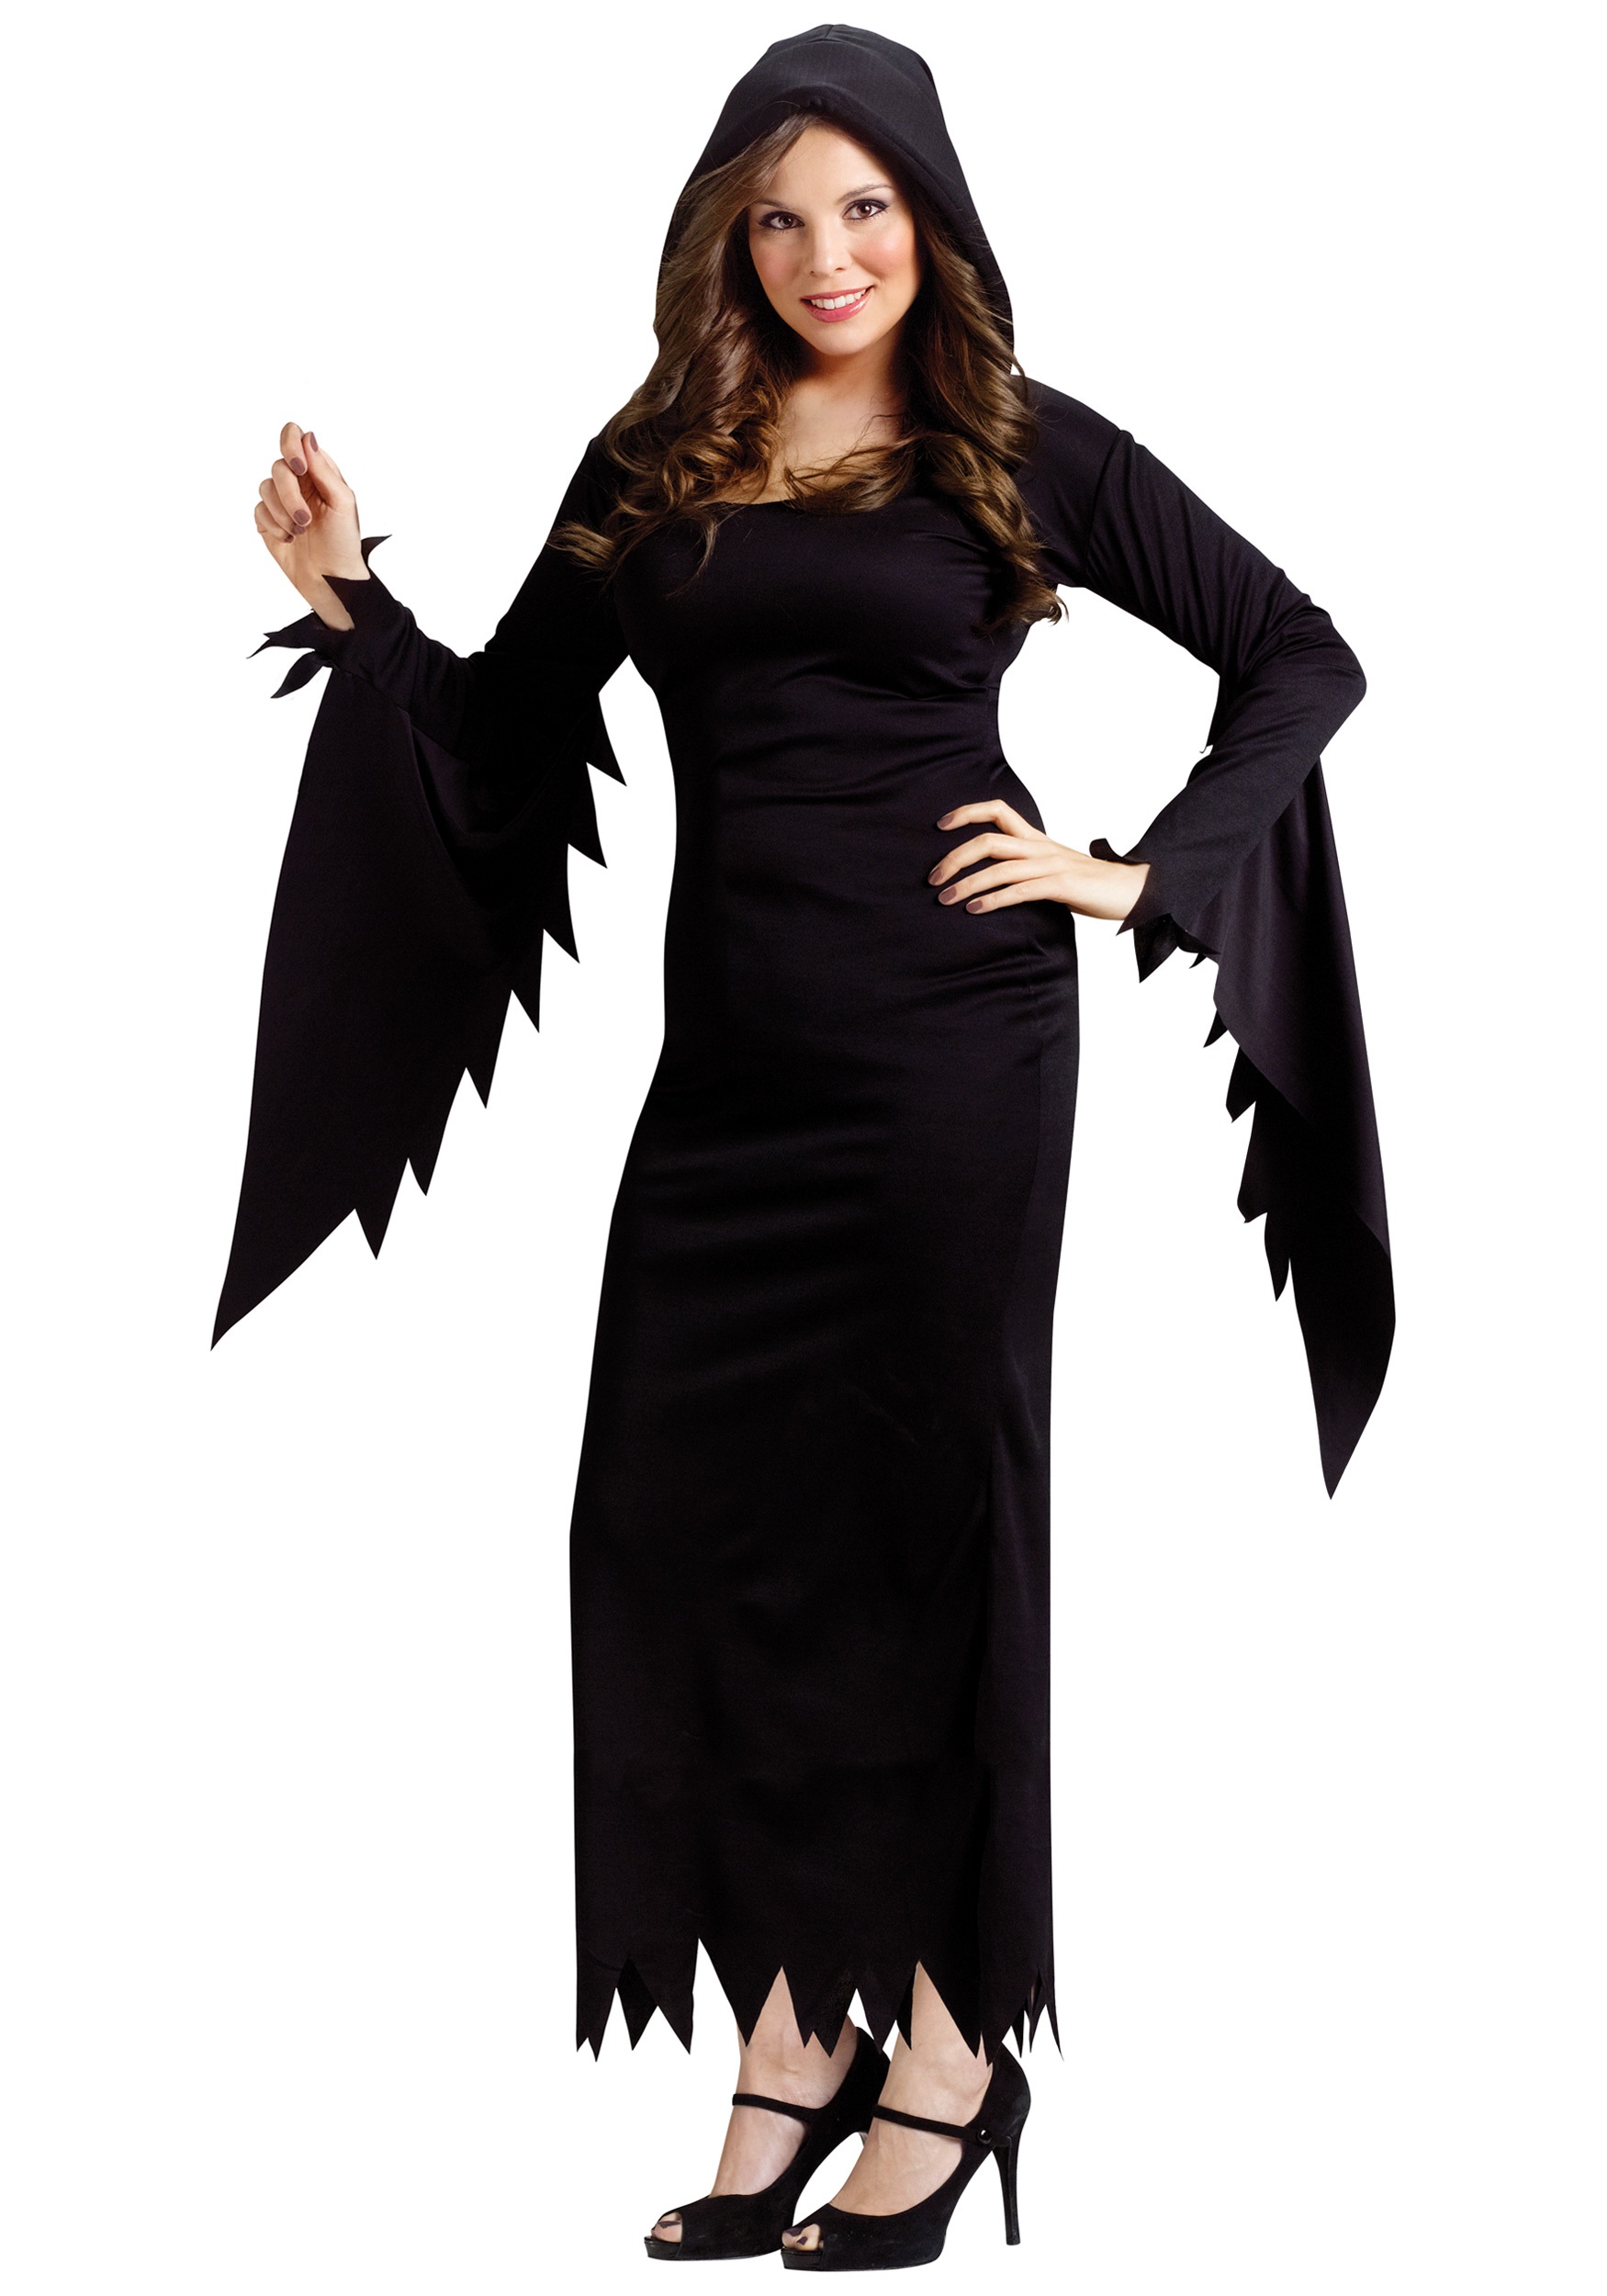 This Plus Hooded Gown is perfect for a number of scary costumes. 